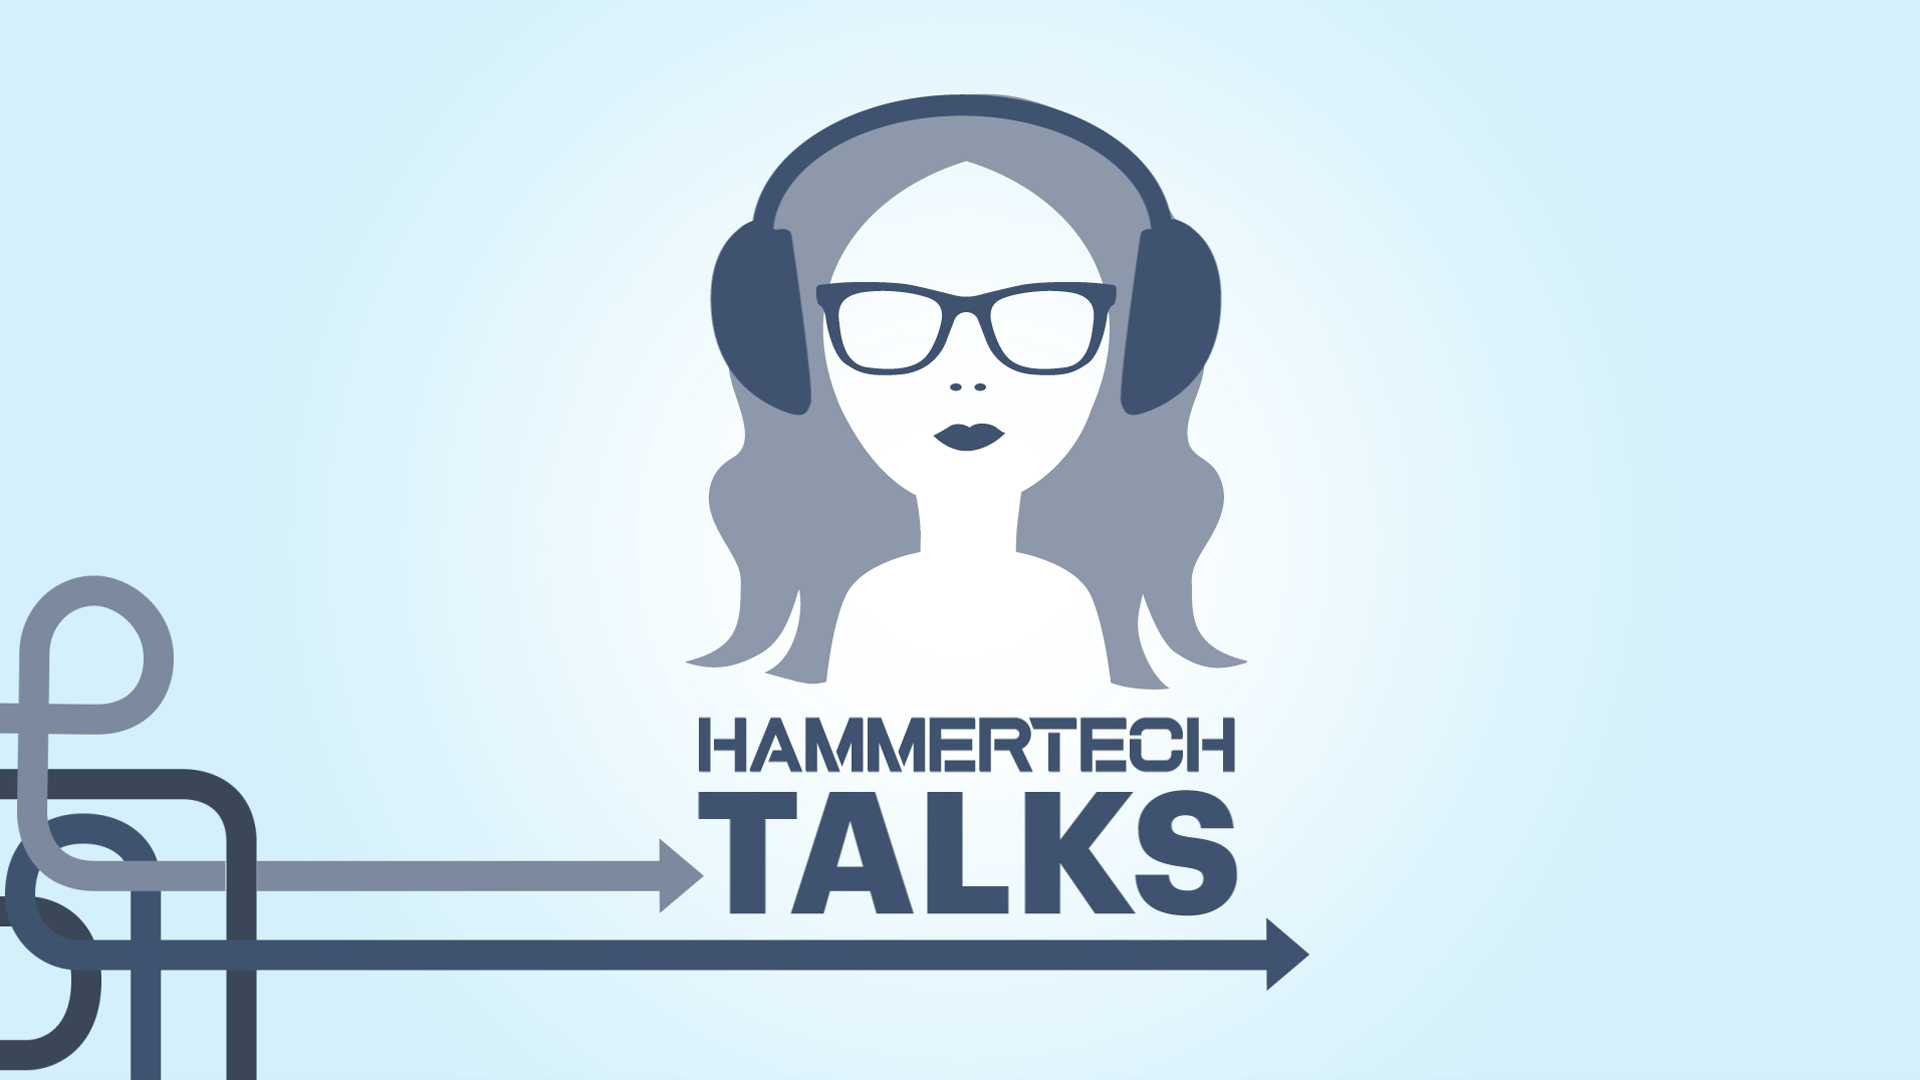 HammerTech Talks with Dona File, Corporate Safety Director, LF Driscoll